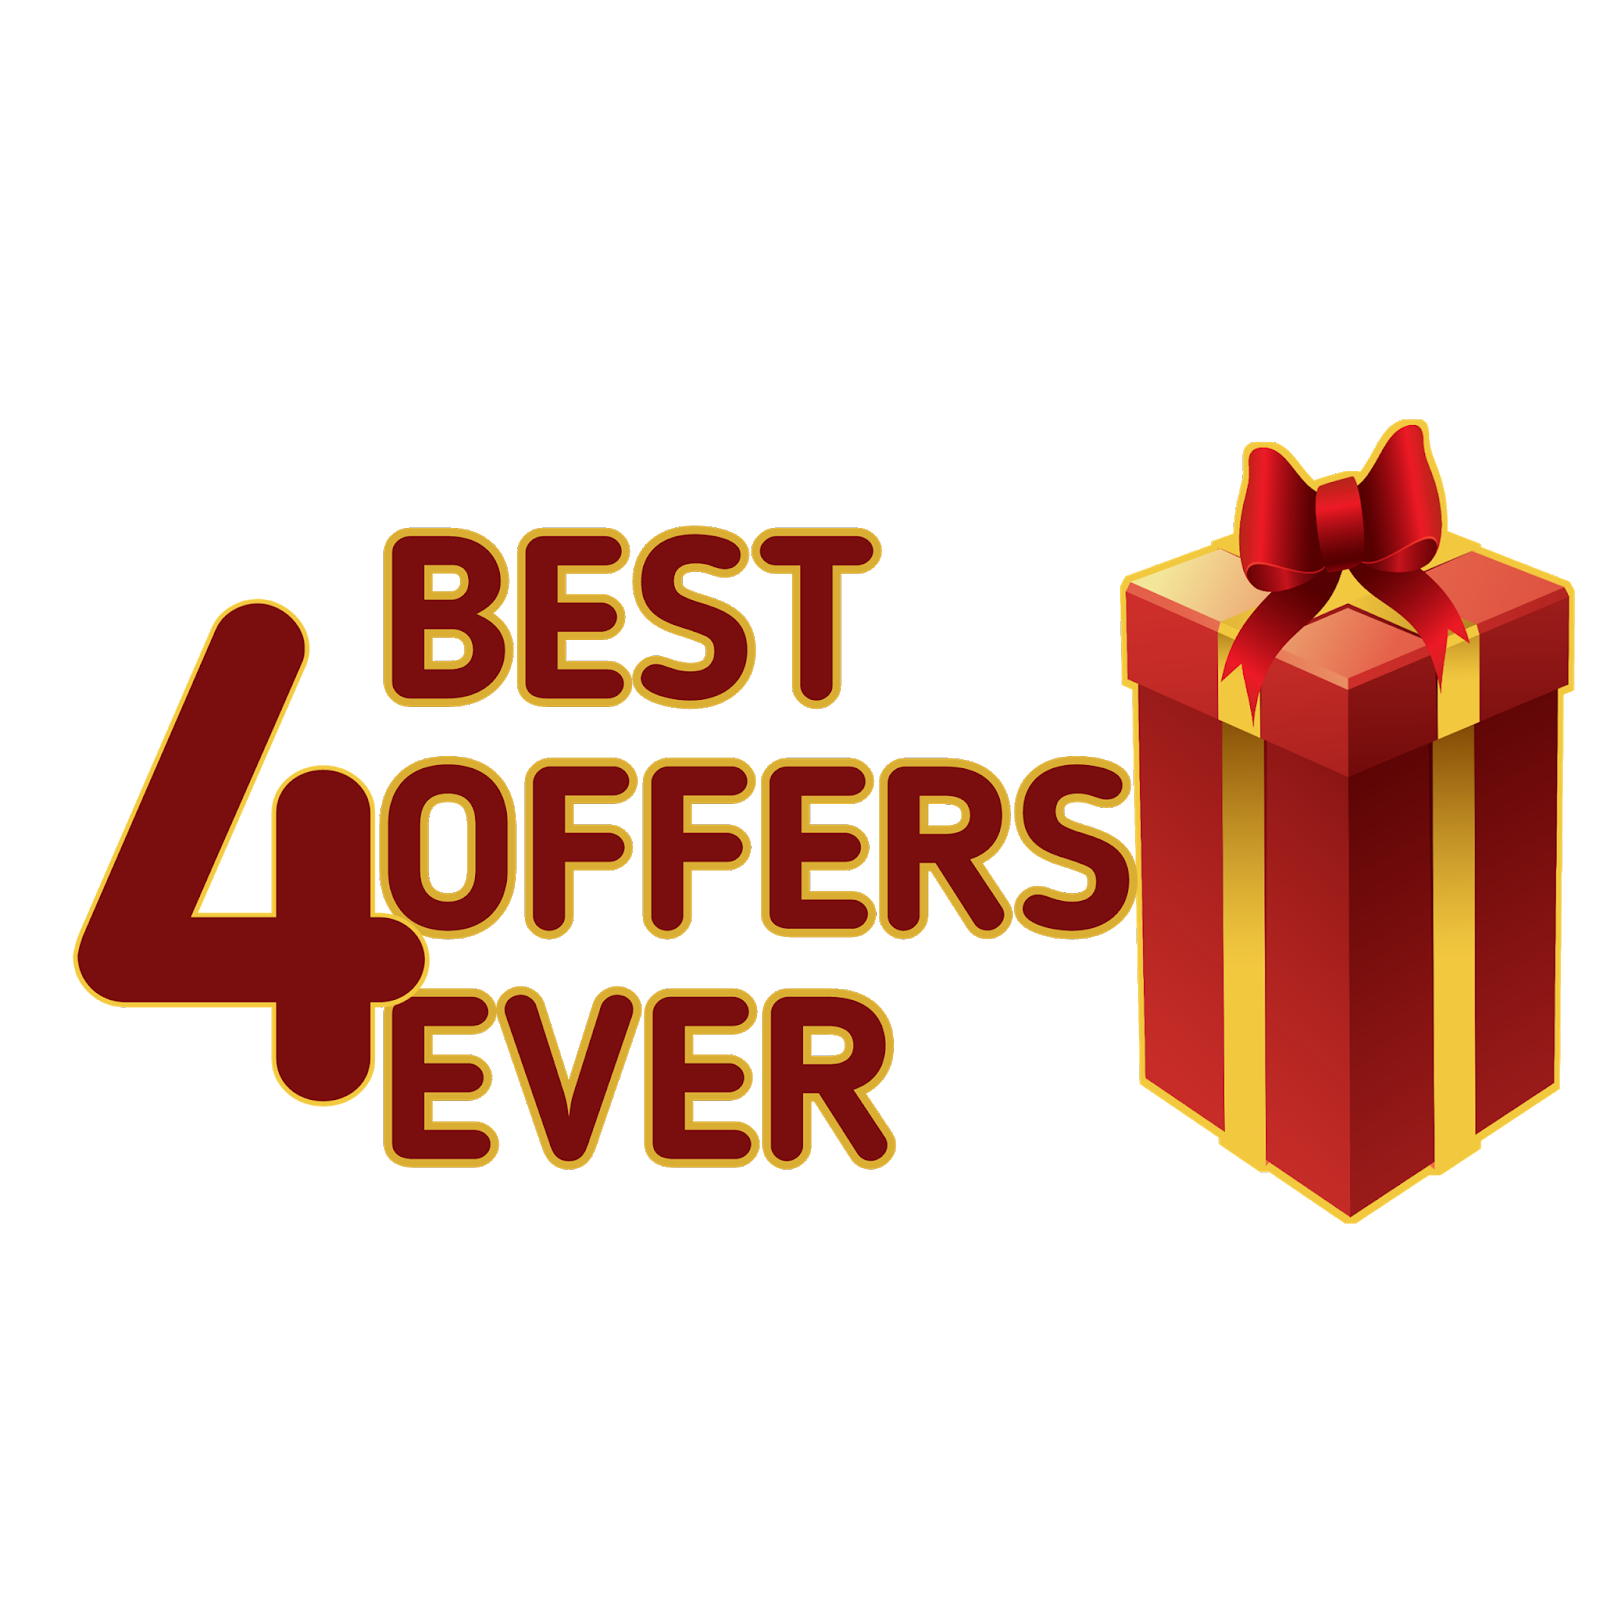 BEST OFFERS FOR EVER